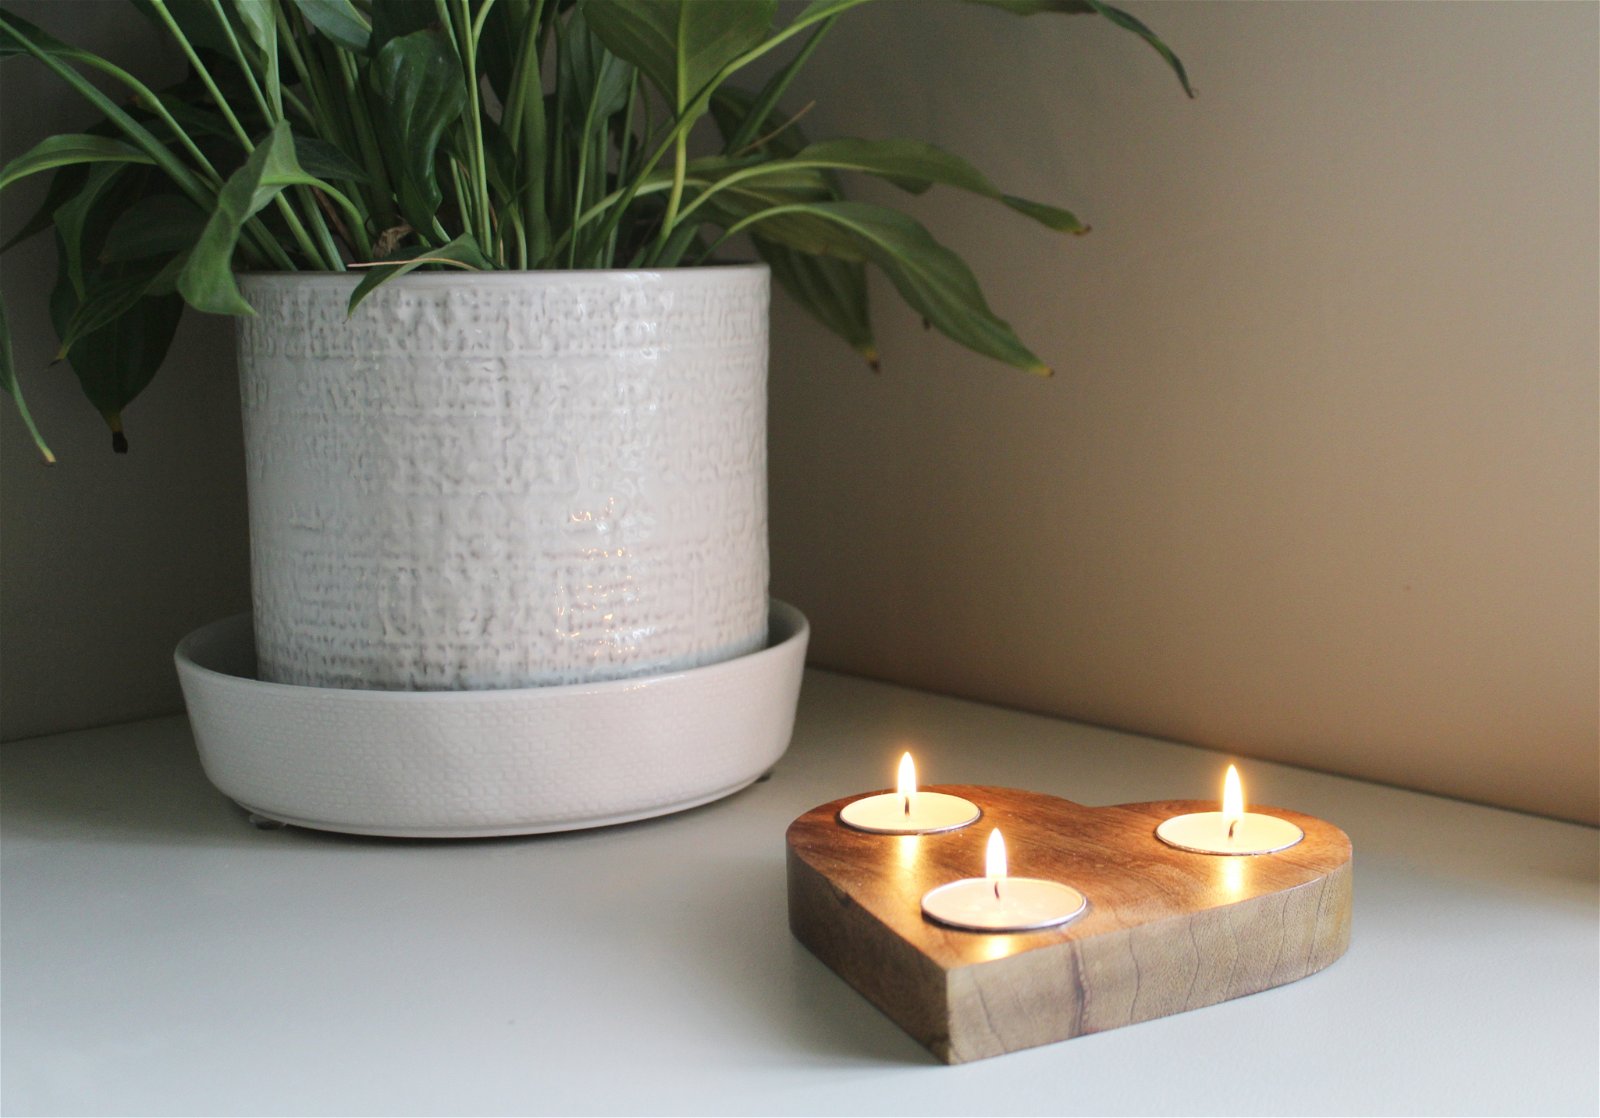 View Heart Shaped Tealight Holder information